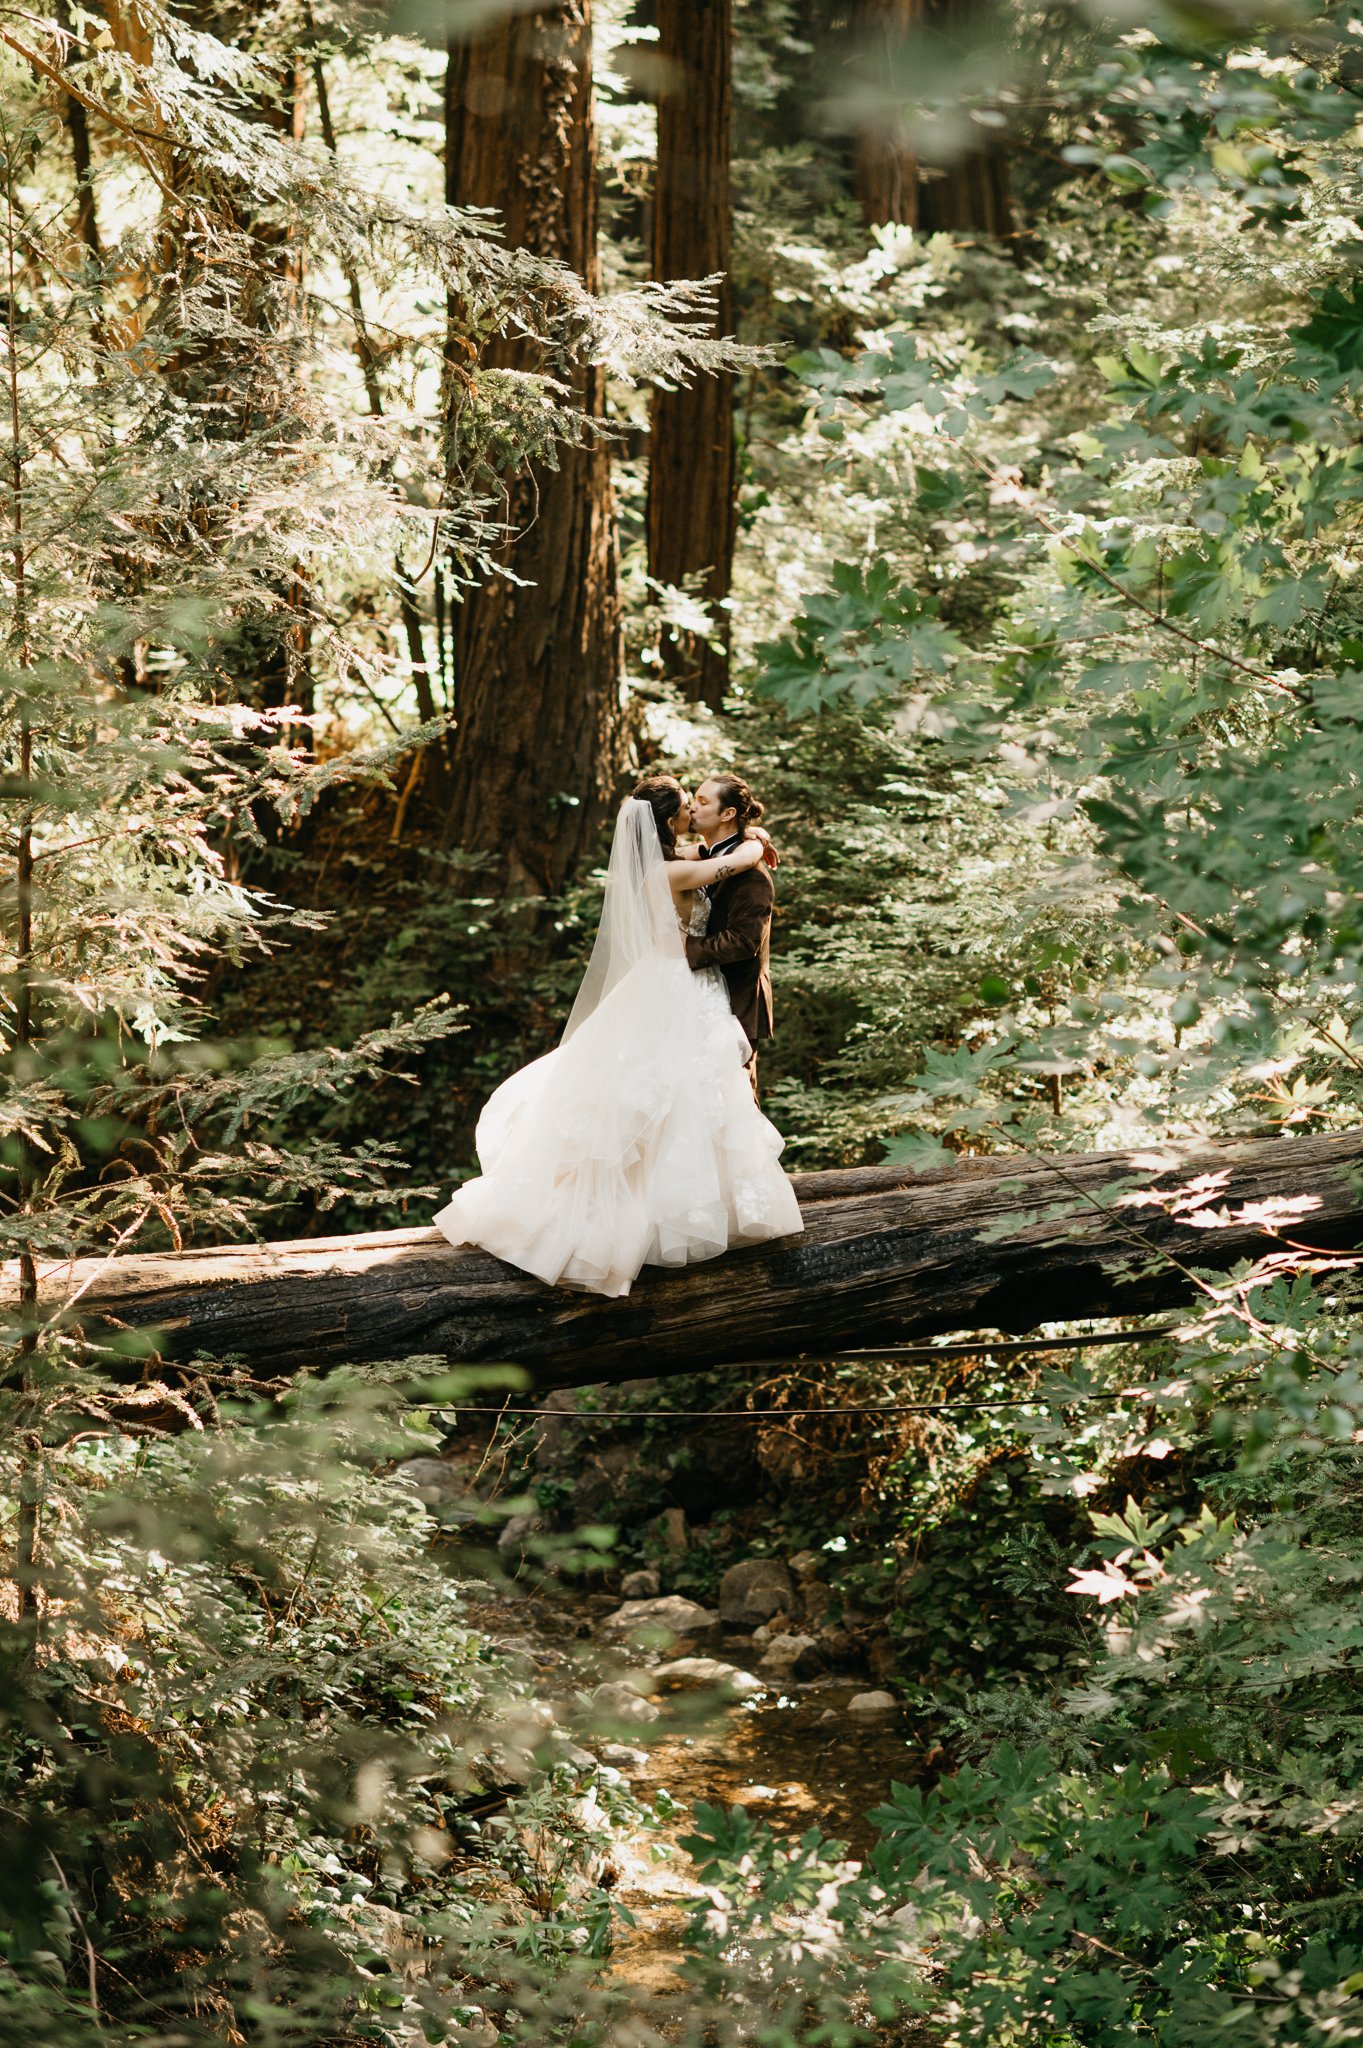 Big Sur Forest wedding bride and groom standing on old fallen tree sharing a kiss with sun peeking through the trees